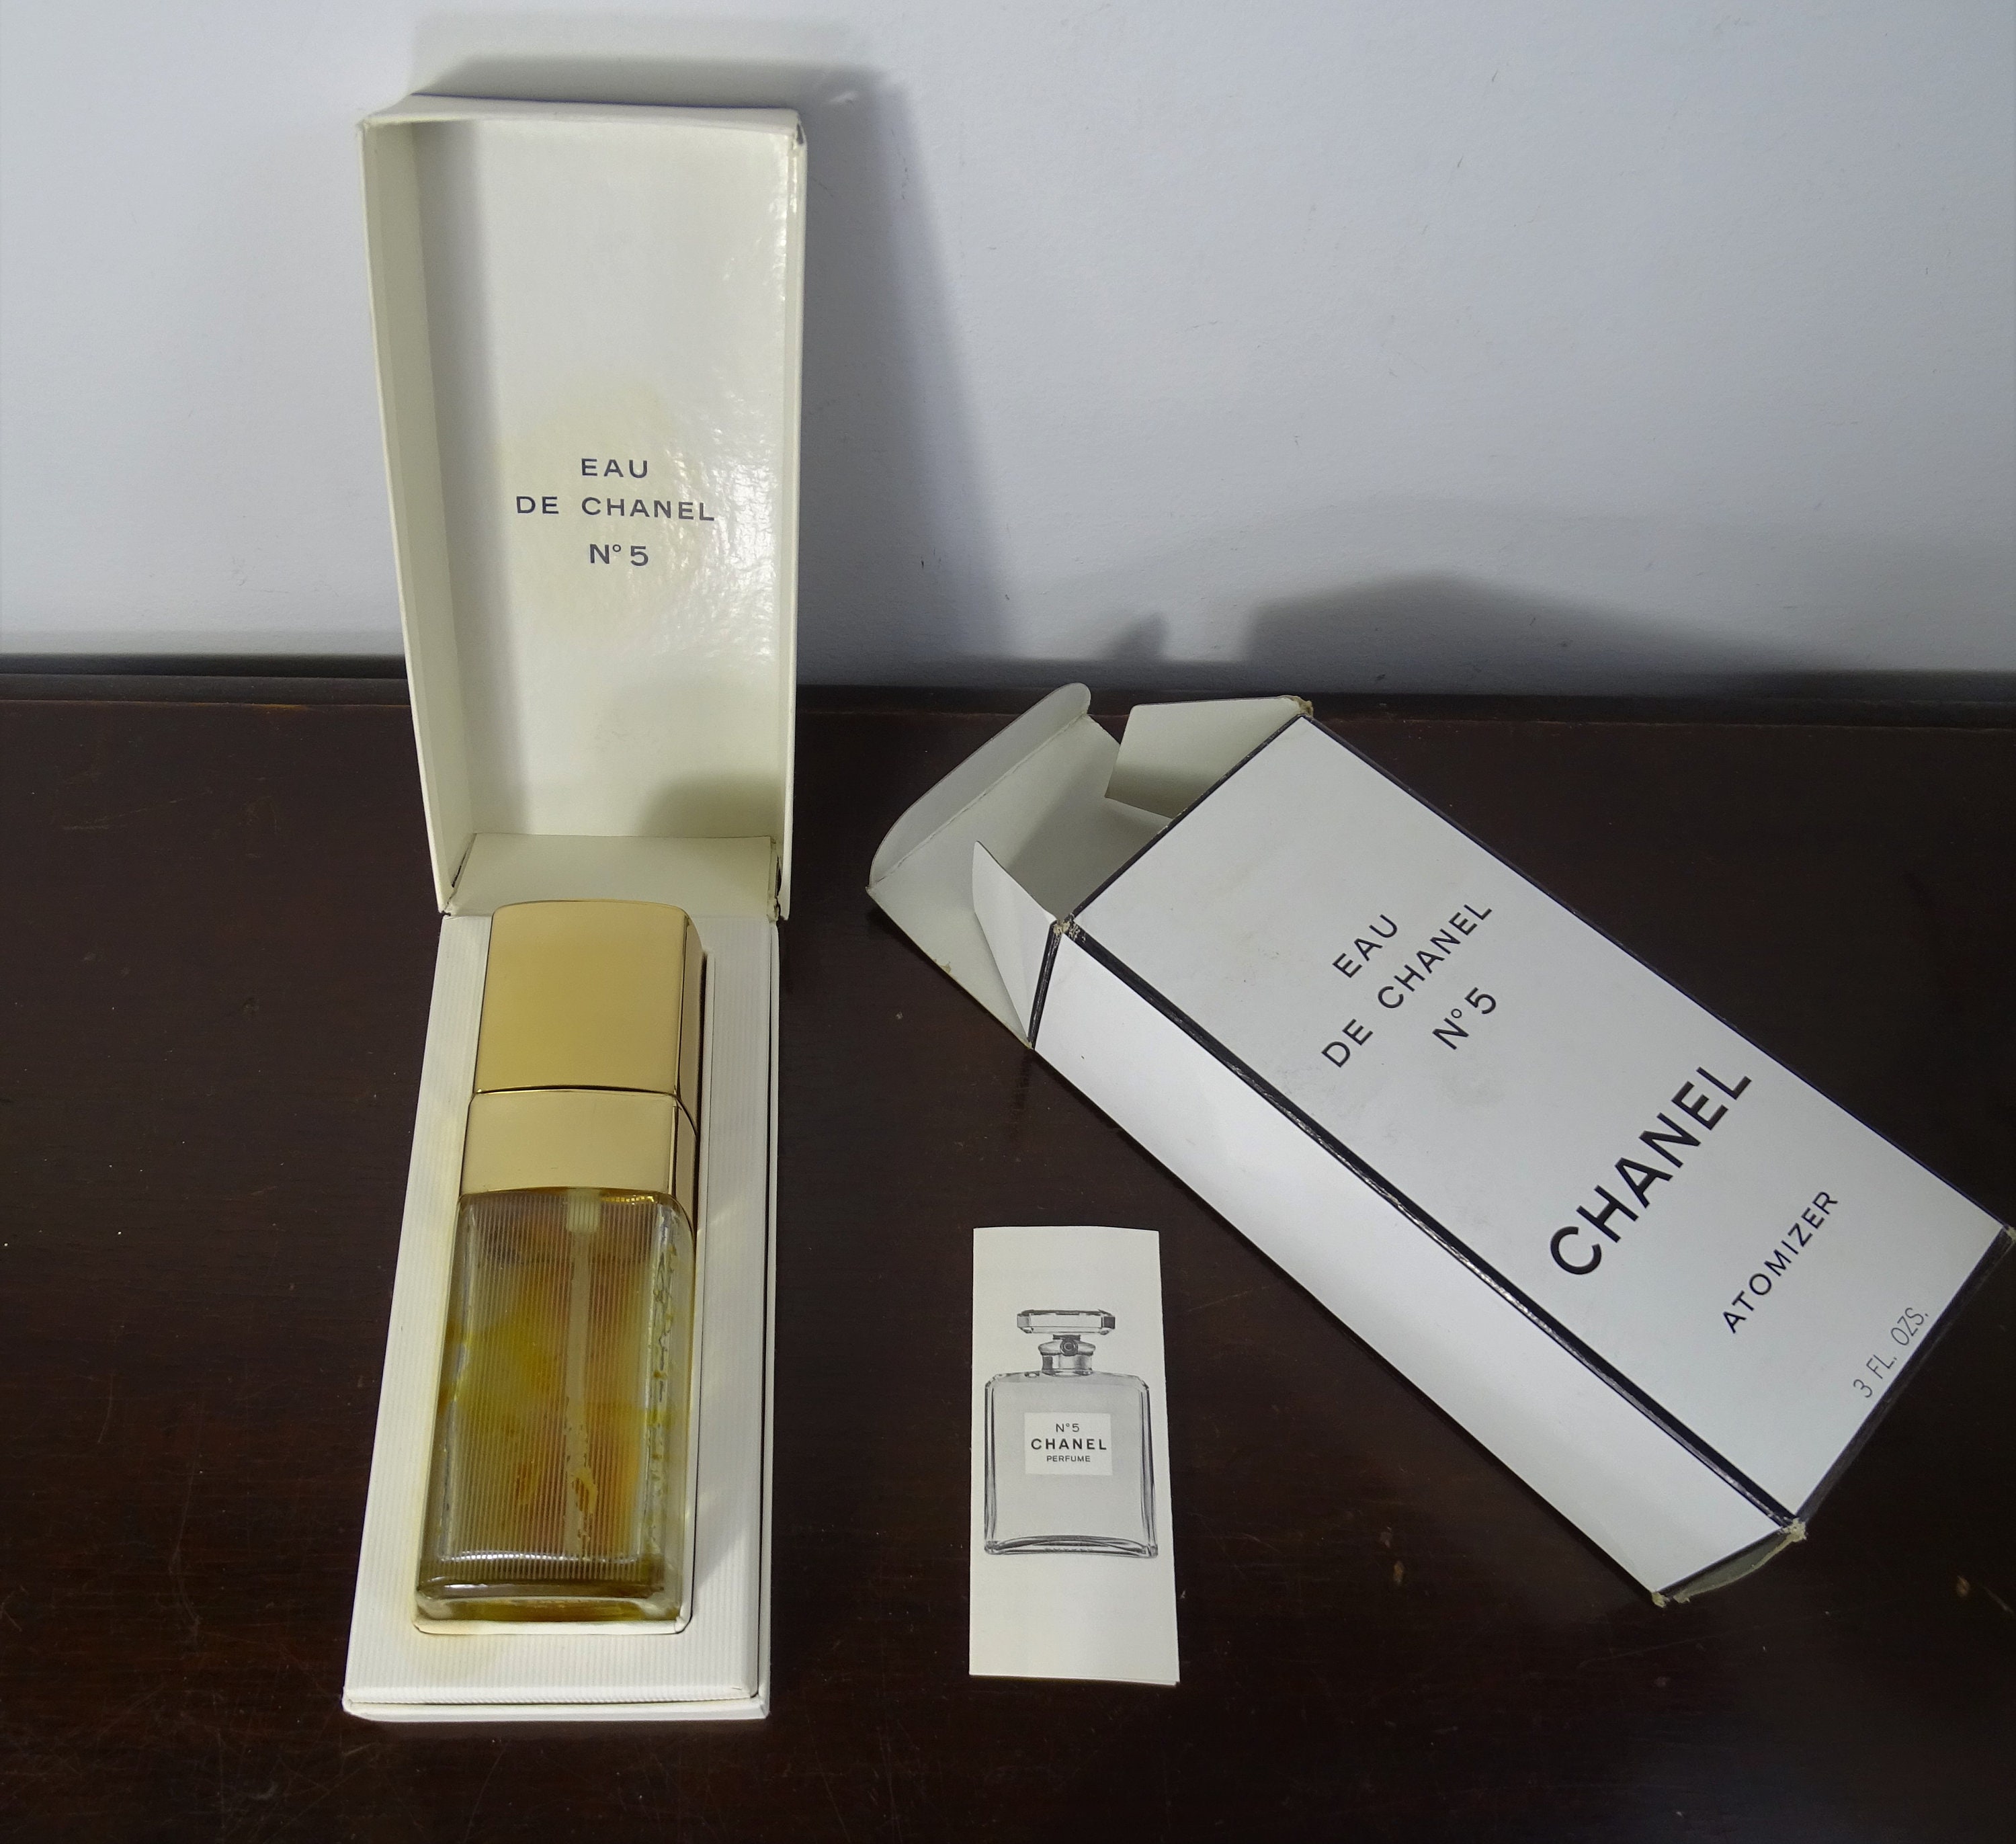 Chanel No 5 Spray Perfume Bottle in Original Box, 1.7 fl oz, 50 ML, Vintage  1970s Cologne, Box and Container Only, No Perfume